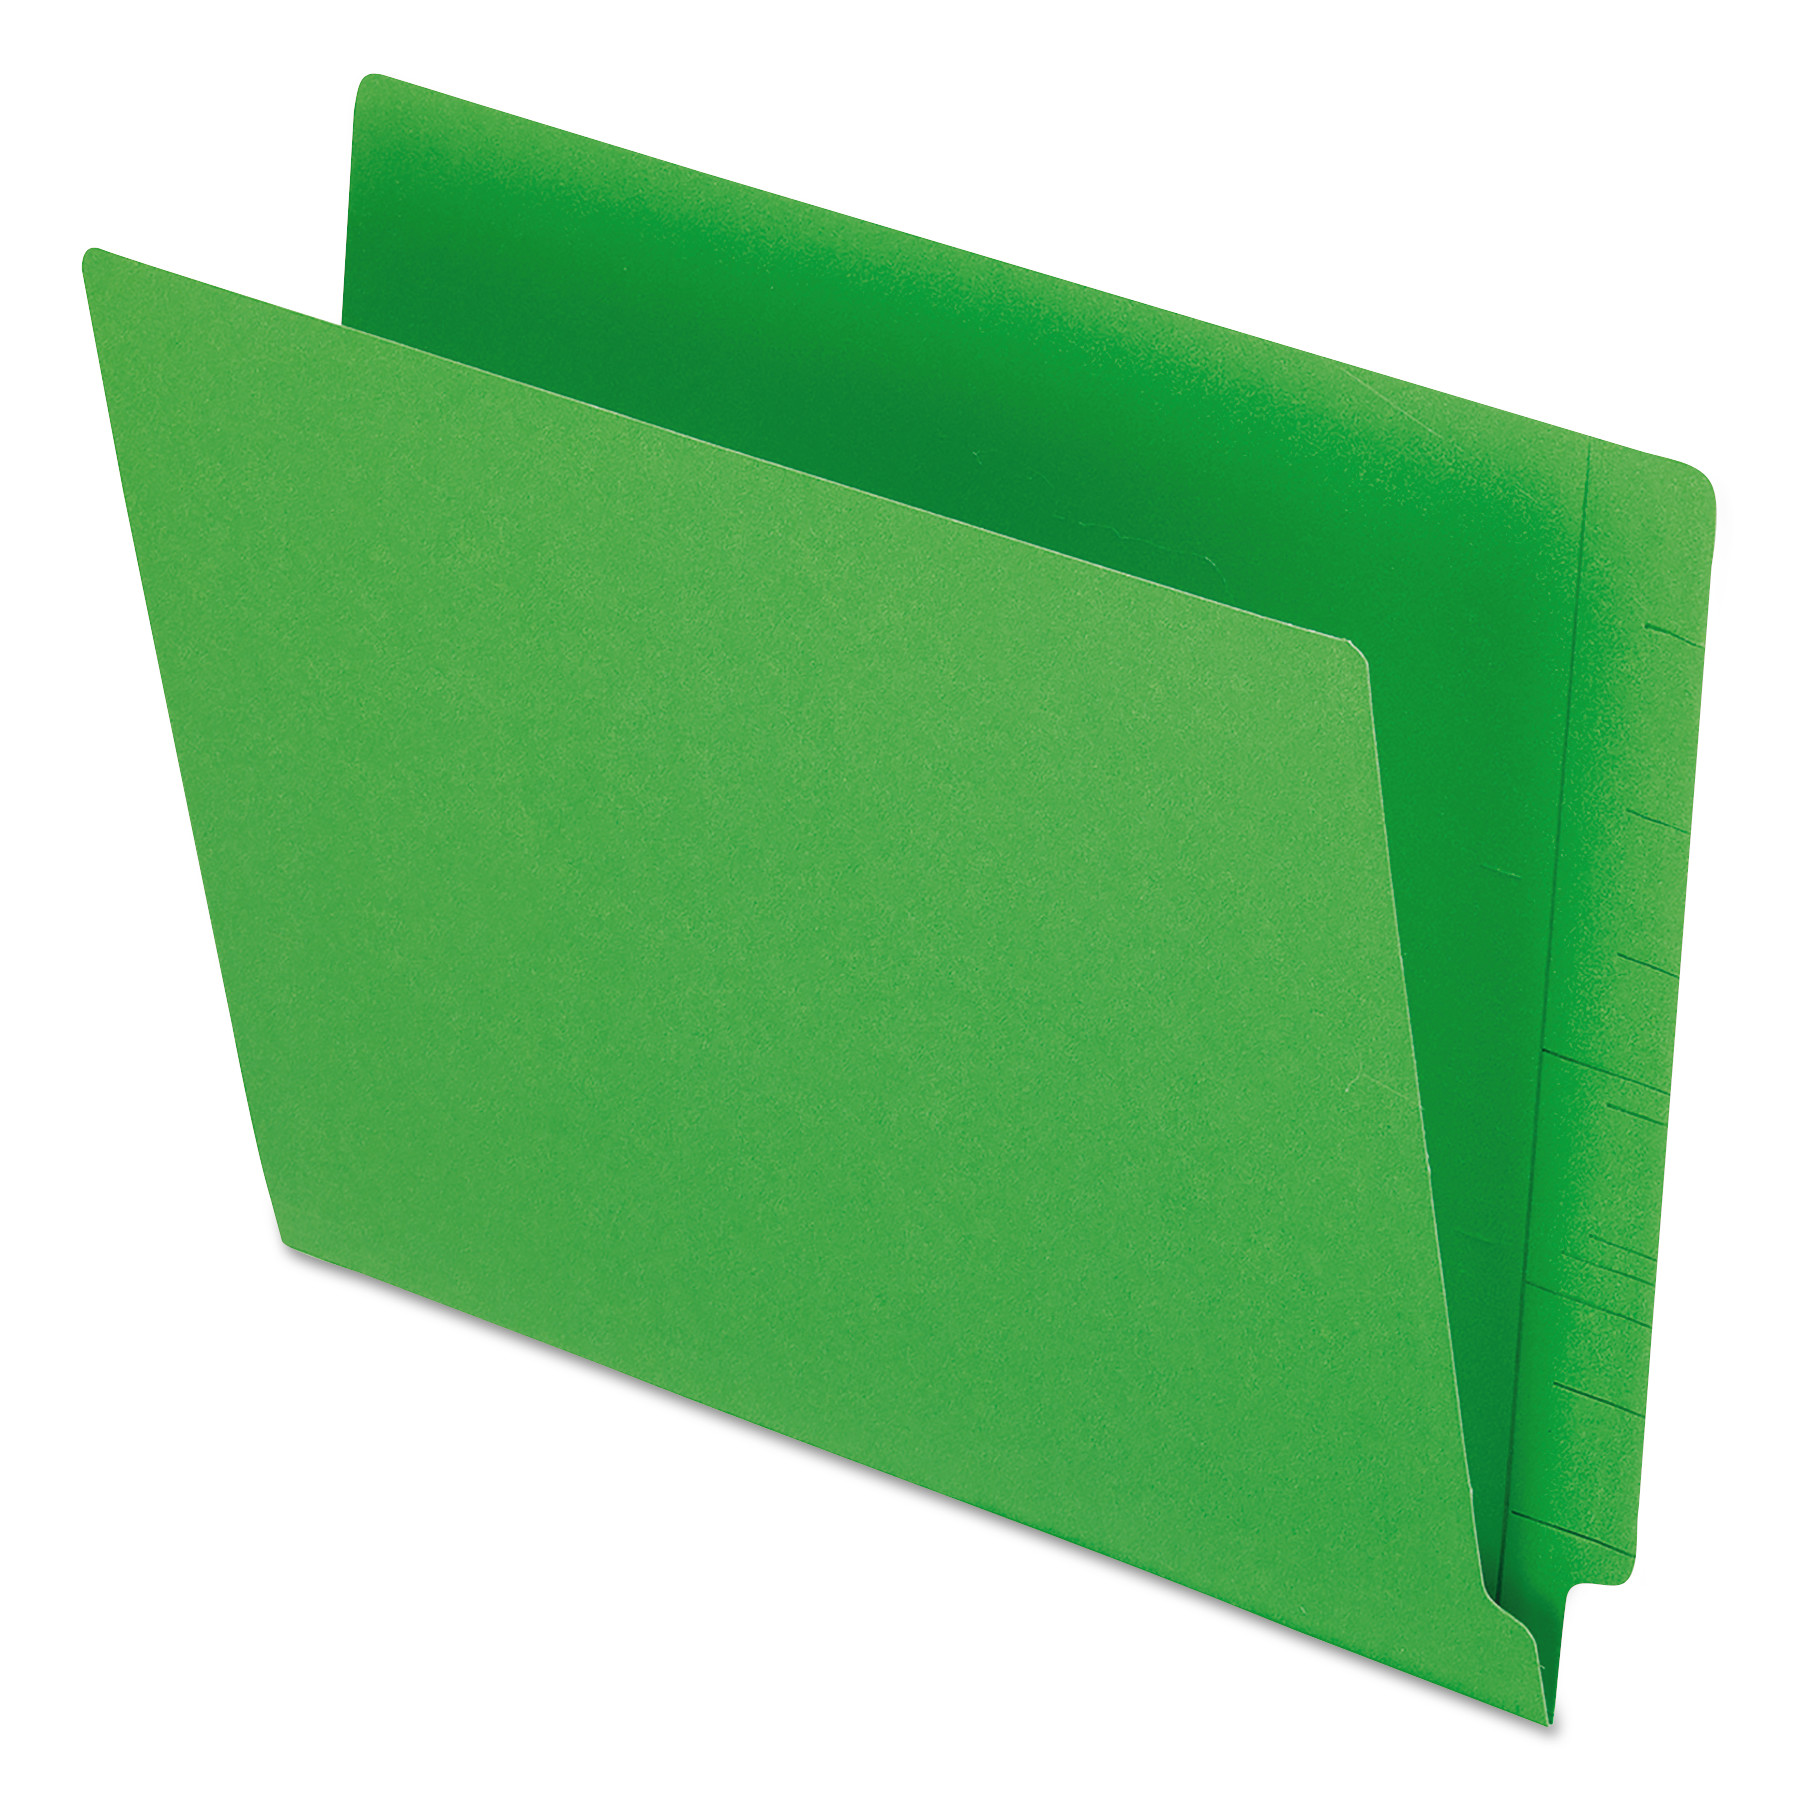  Pendaflex H110DGR Colored End Tab Folders with Reinforced 2-Ply Straight Cut Tabs, Letter Size, Green, 100/Box (PFXH110DGR) 